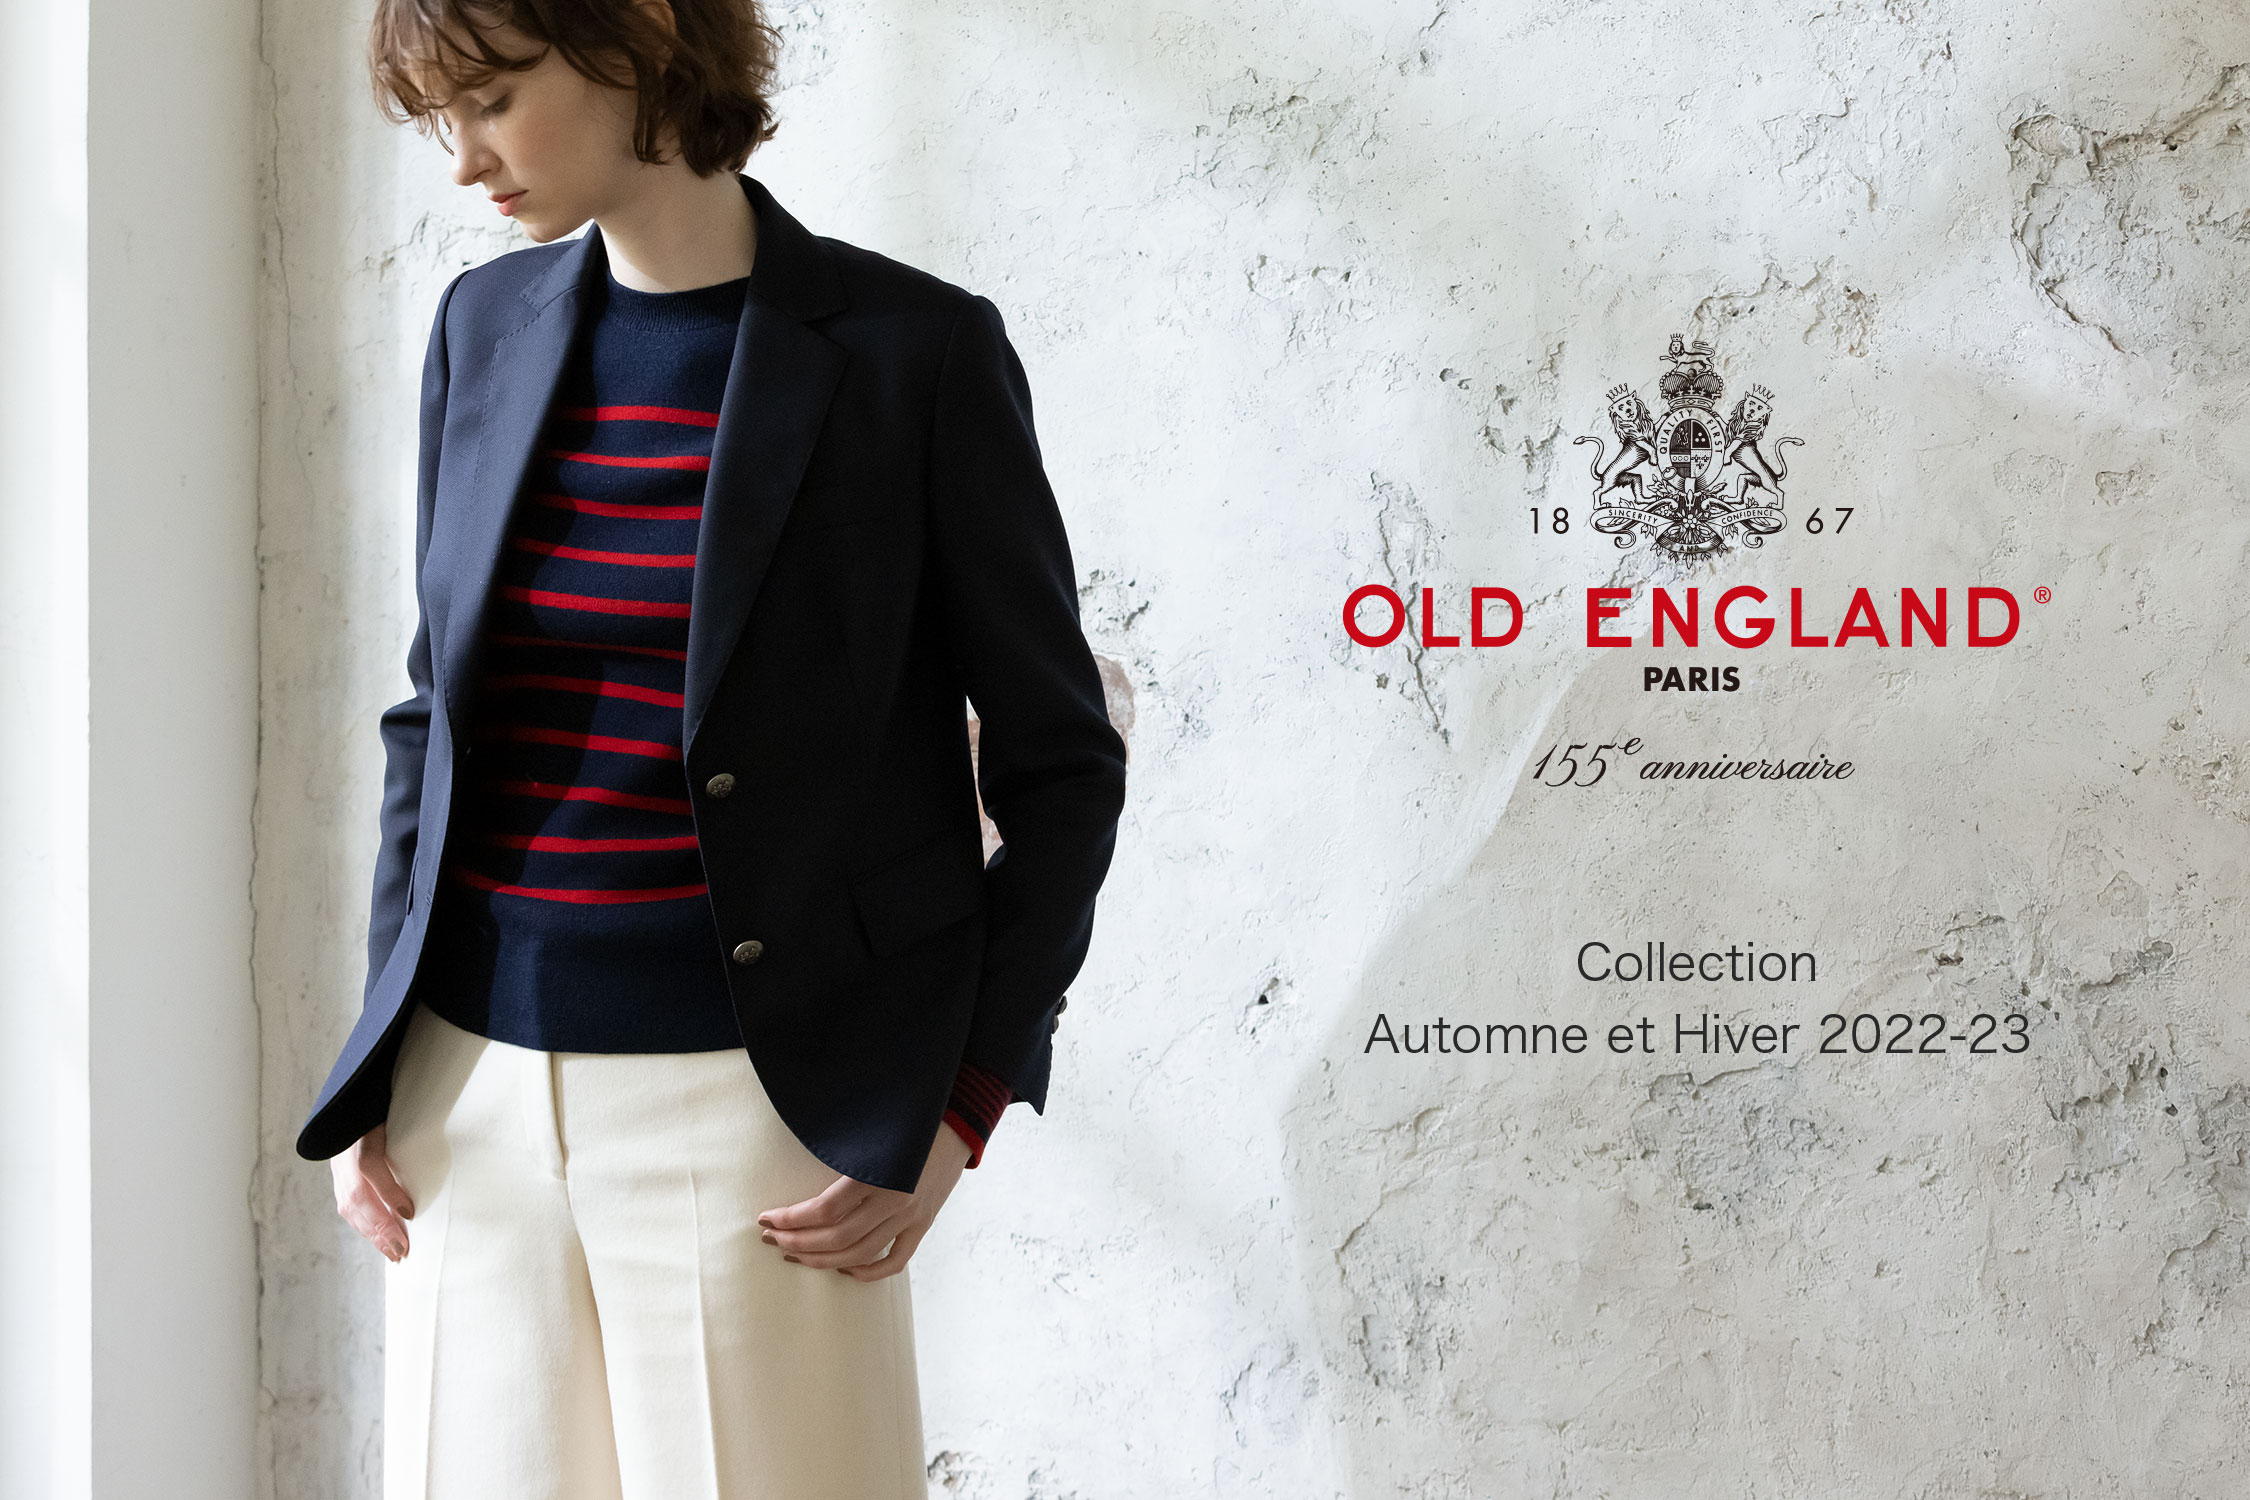 Collection Automne et Hiver 2022-23 | OLD ENGLAND